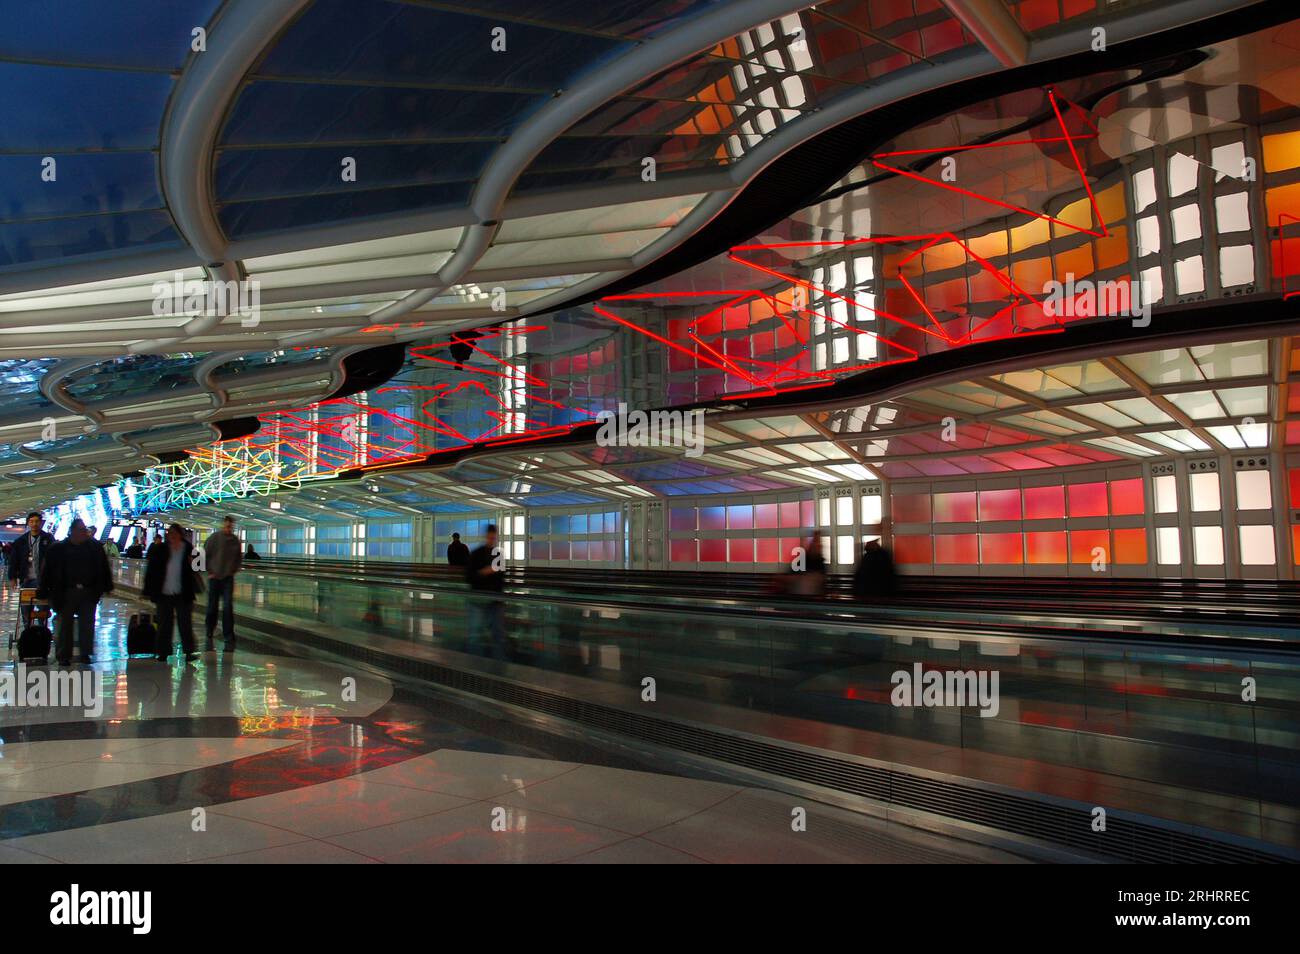 Travelers walk through The Sky's the Limit, a colorful and illuminating art work installed between terminals at O'Hare International Airport, Chicago Stock Photo